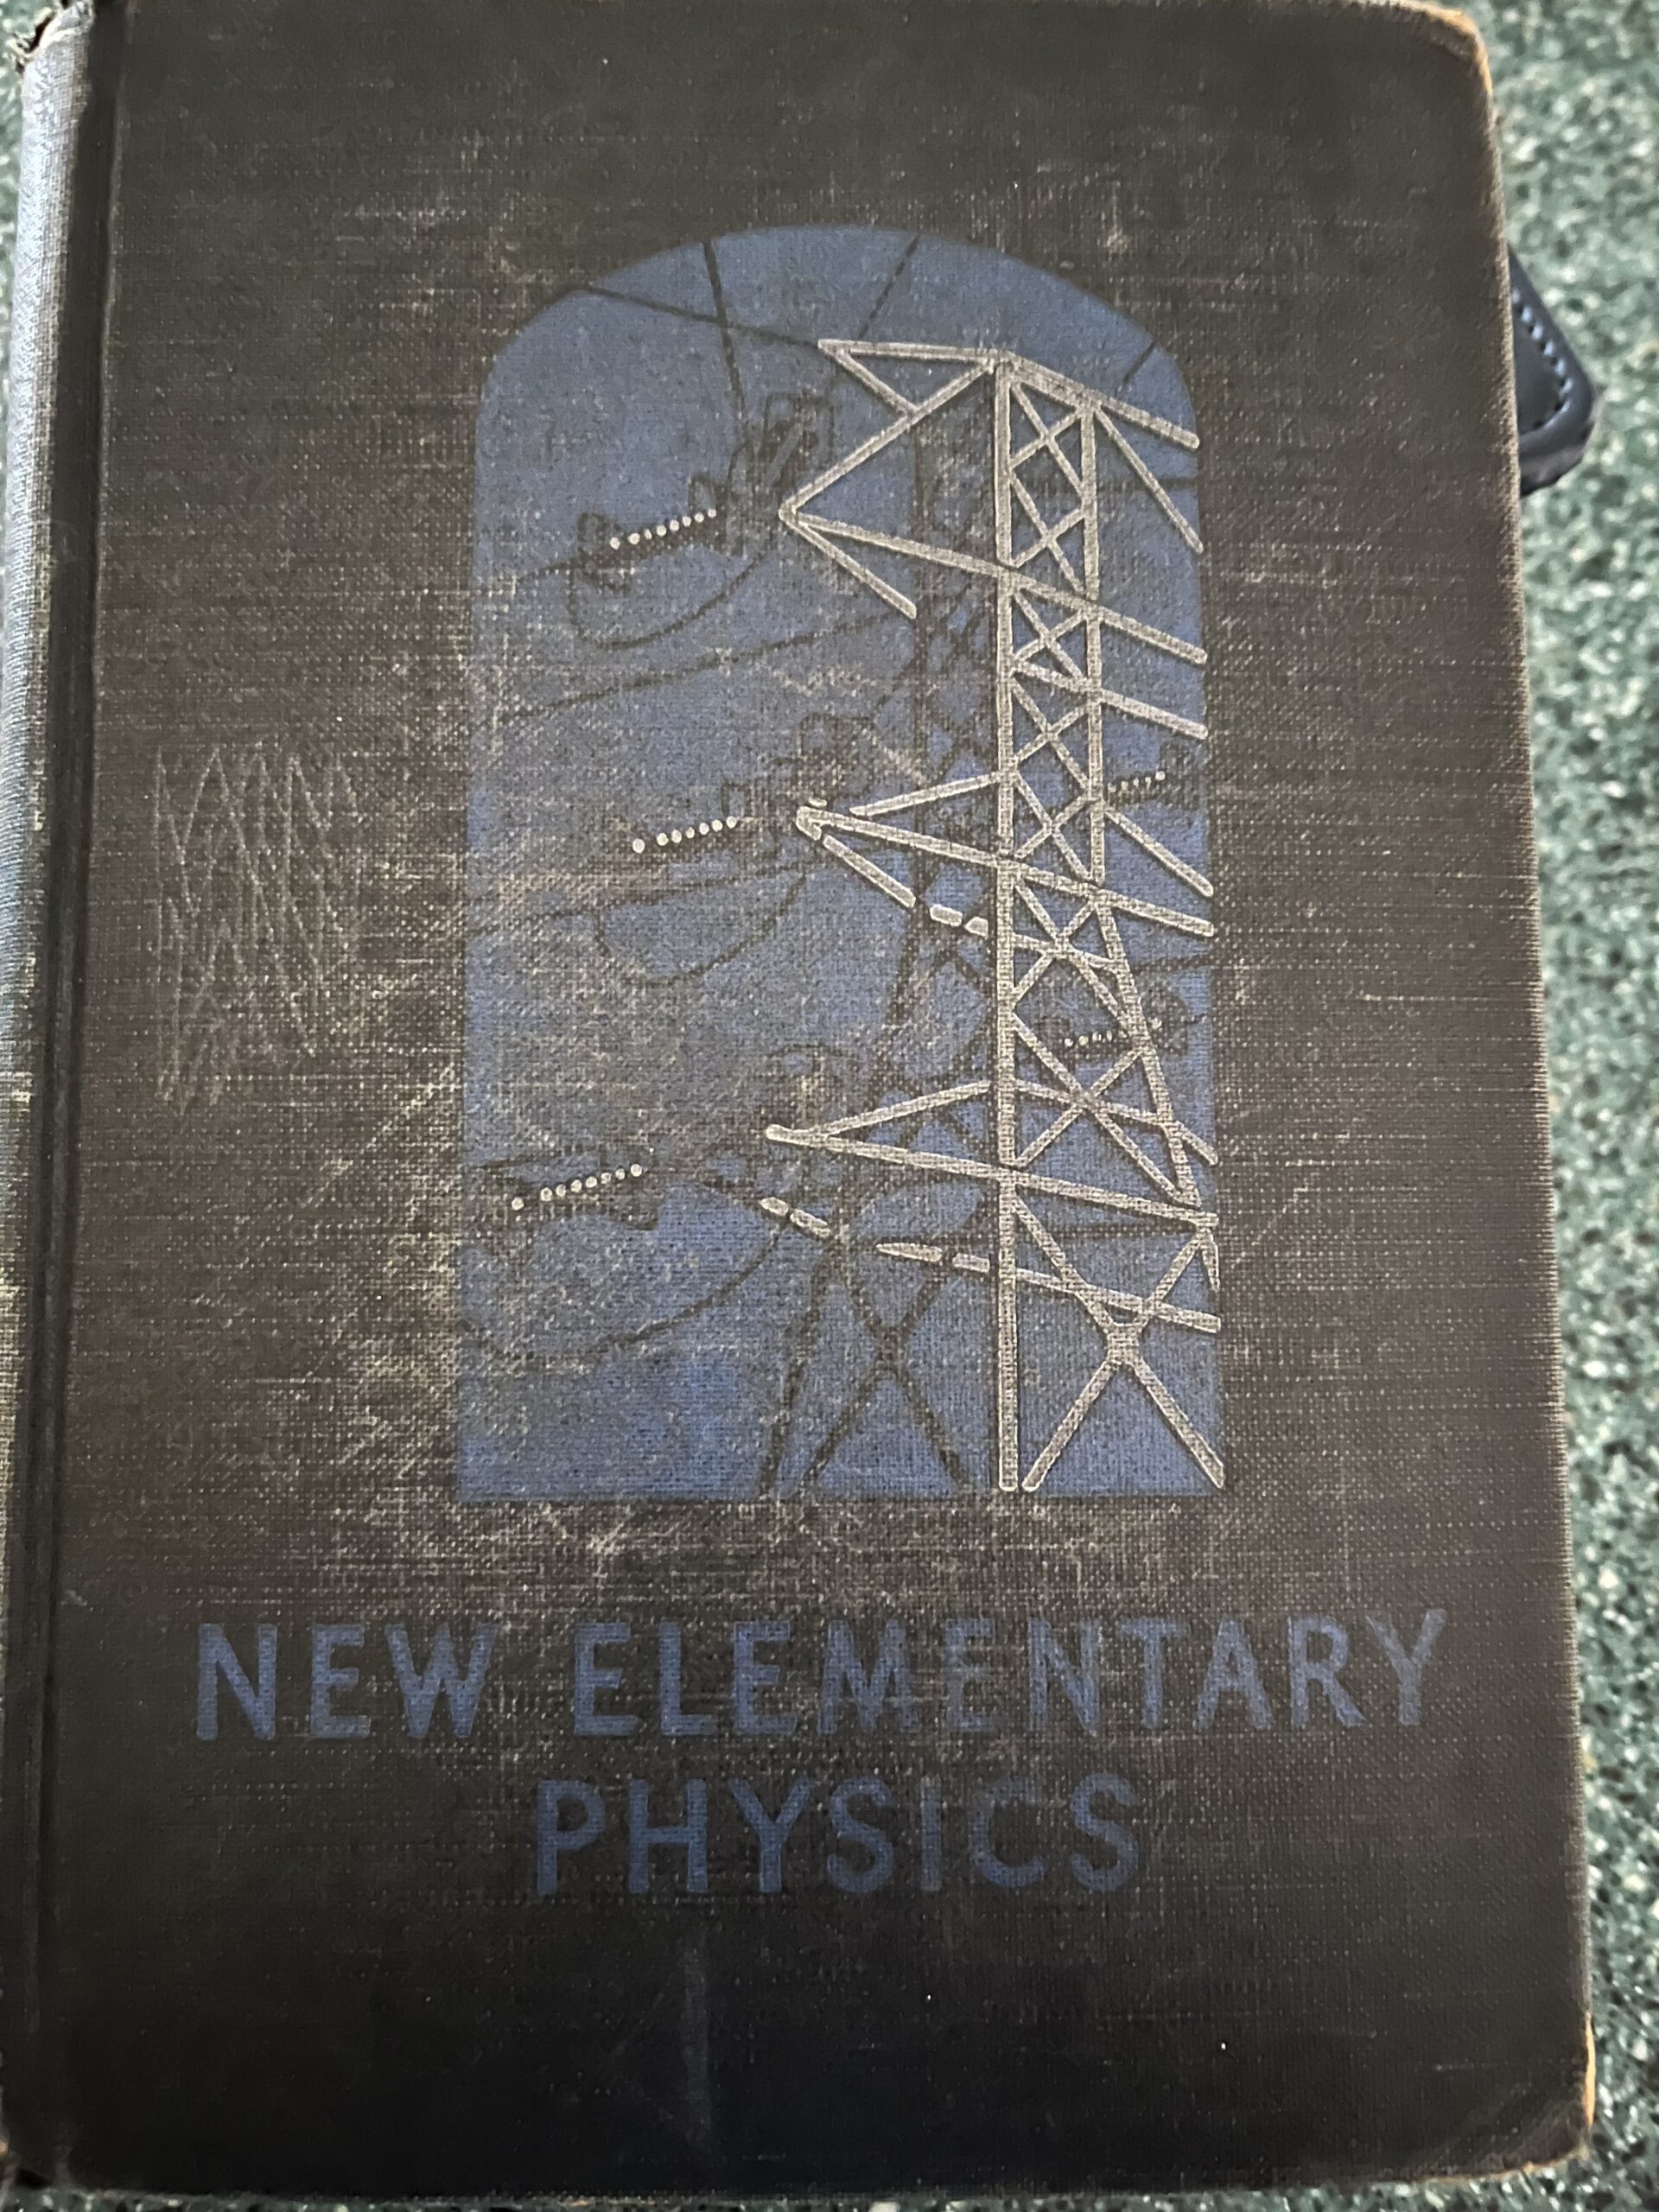 Front cover of "New Elementary Physics" Textbook